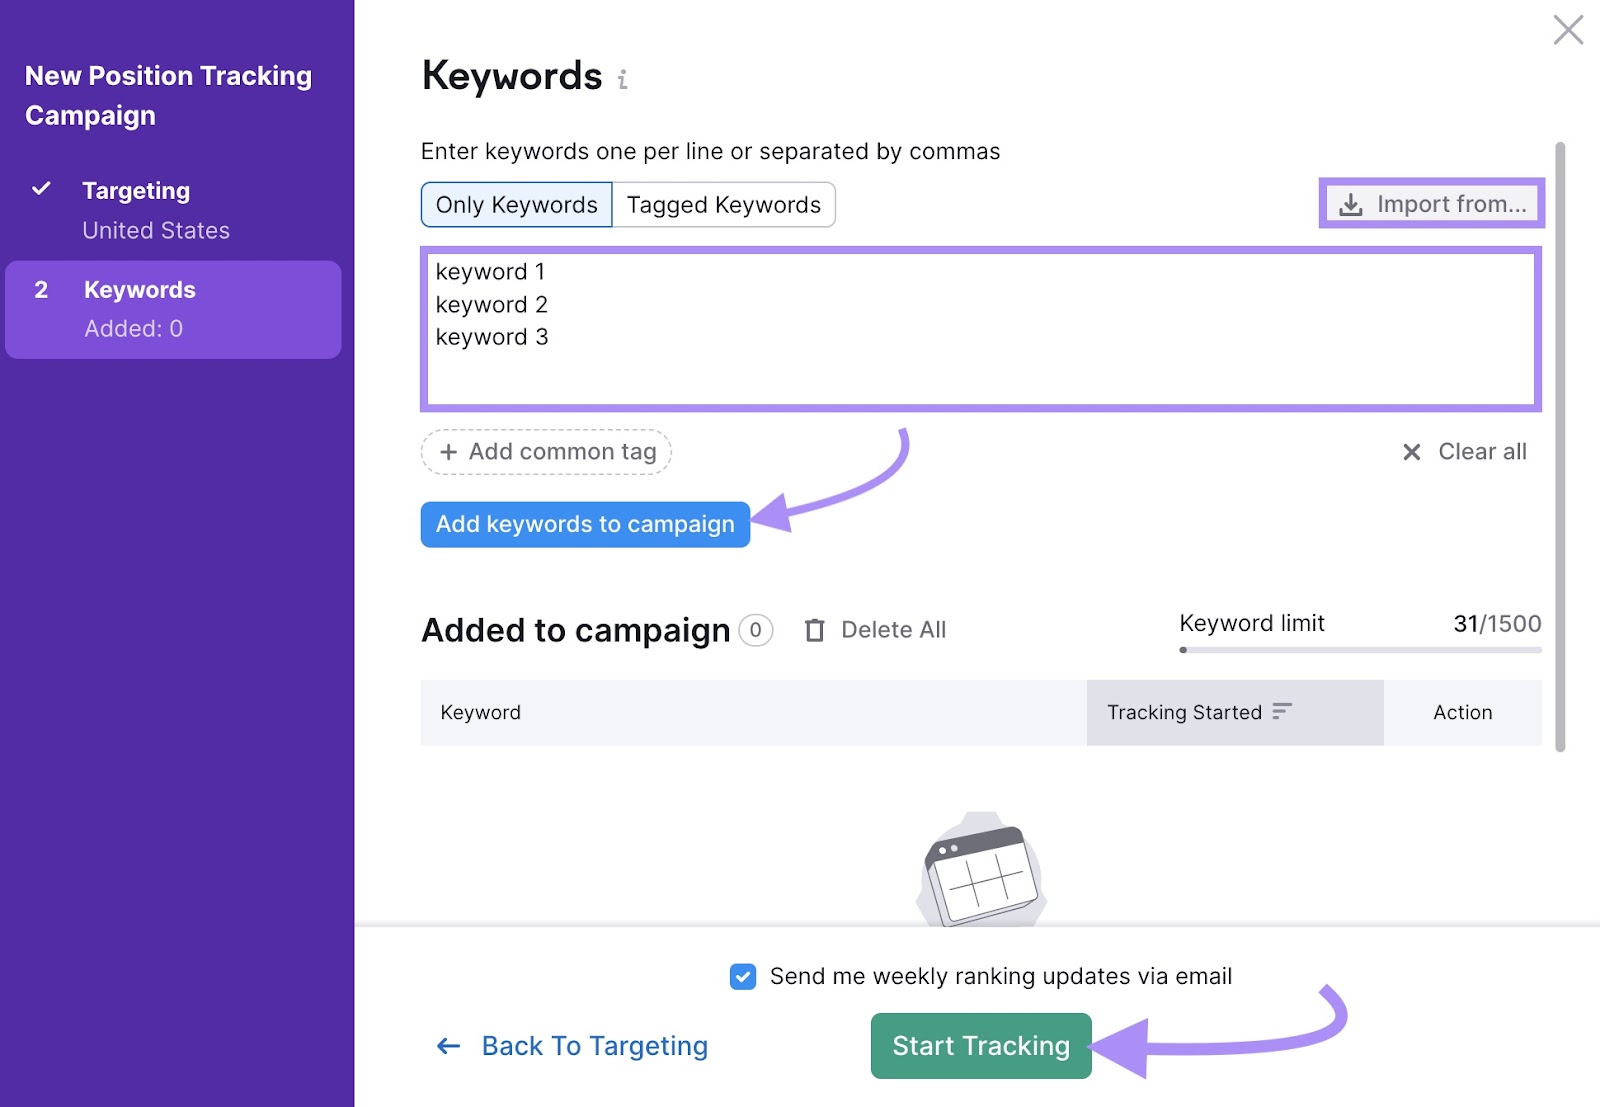 Add keywords to campaign in Position Tracking tool